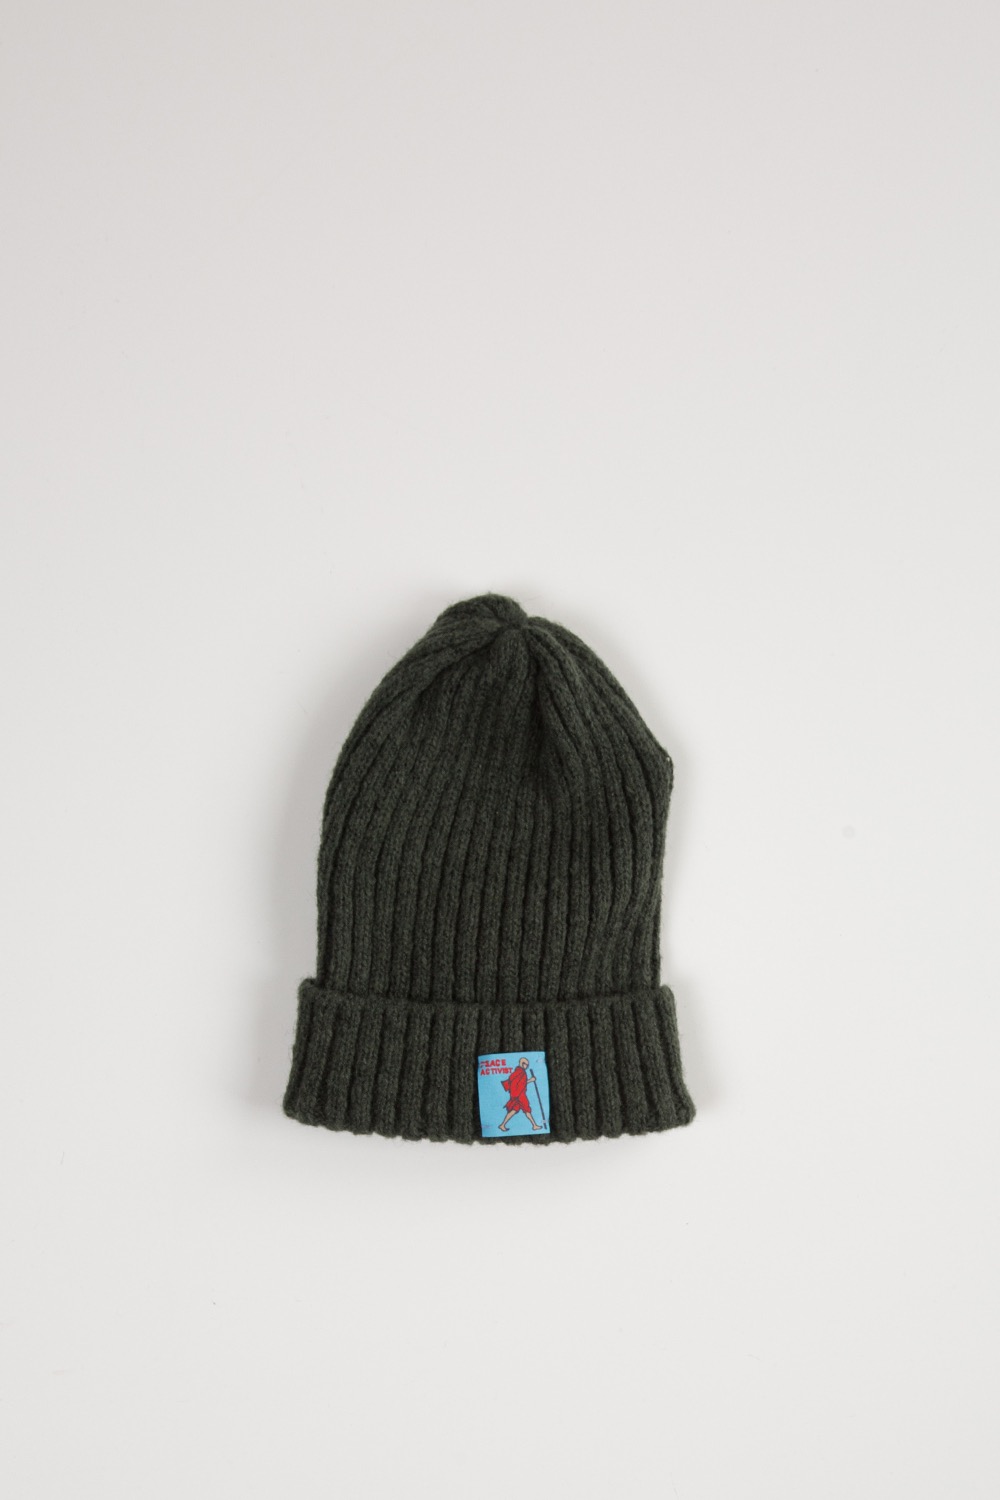 5G WOOL KNIT CAP TURQUOISE